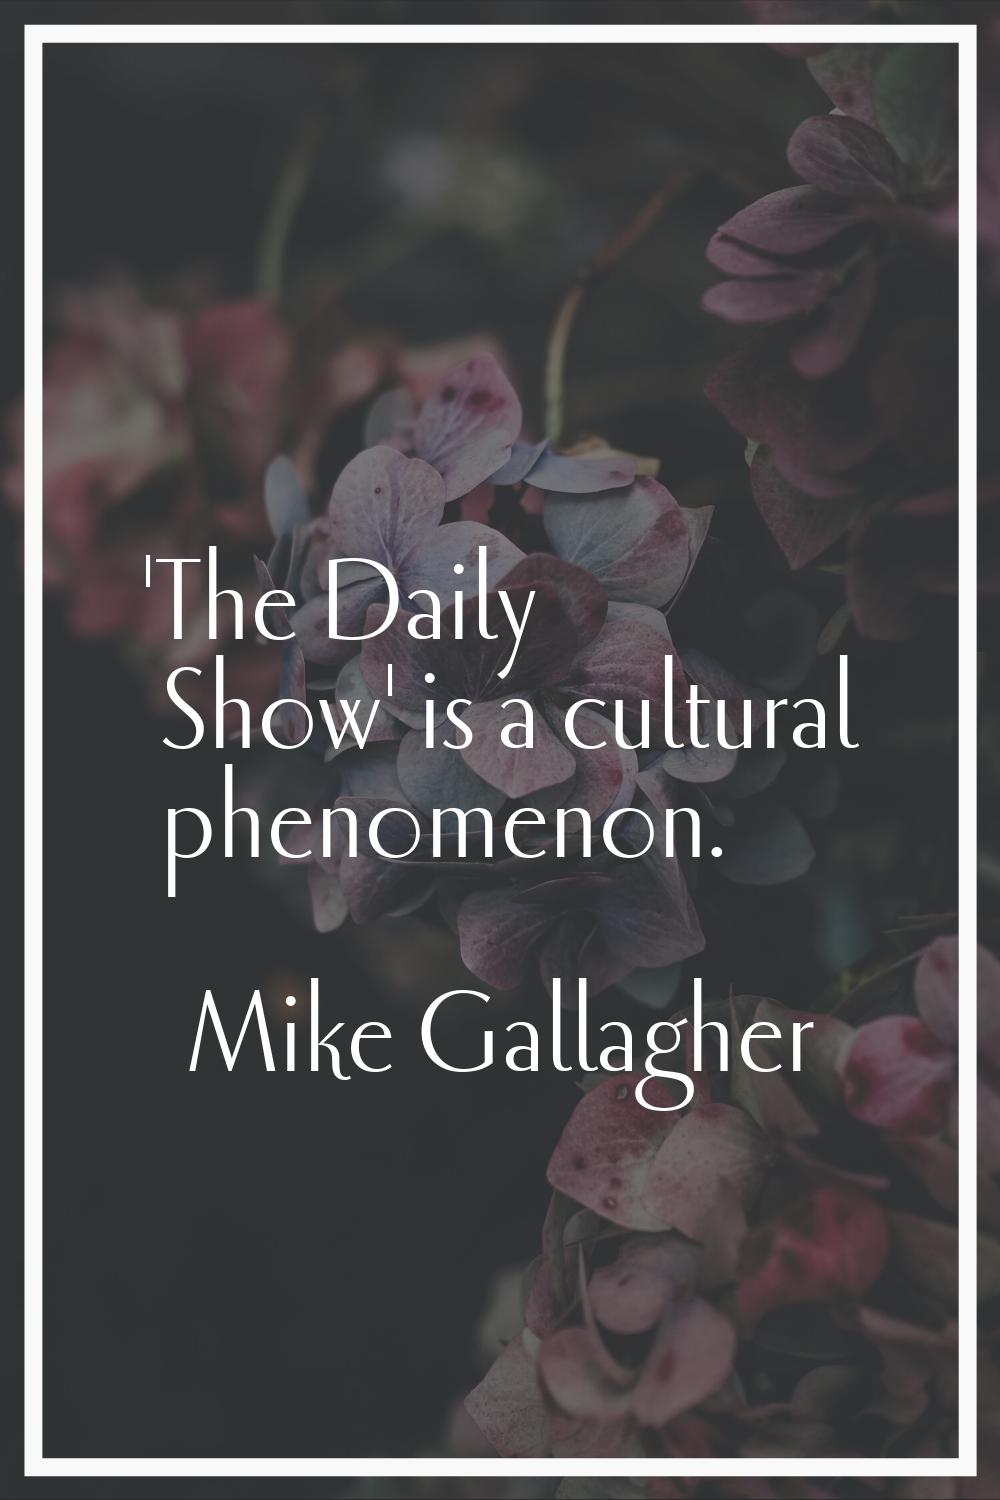 'The Daily Show' is a cultural phenomenon.